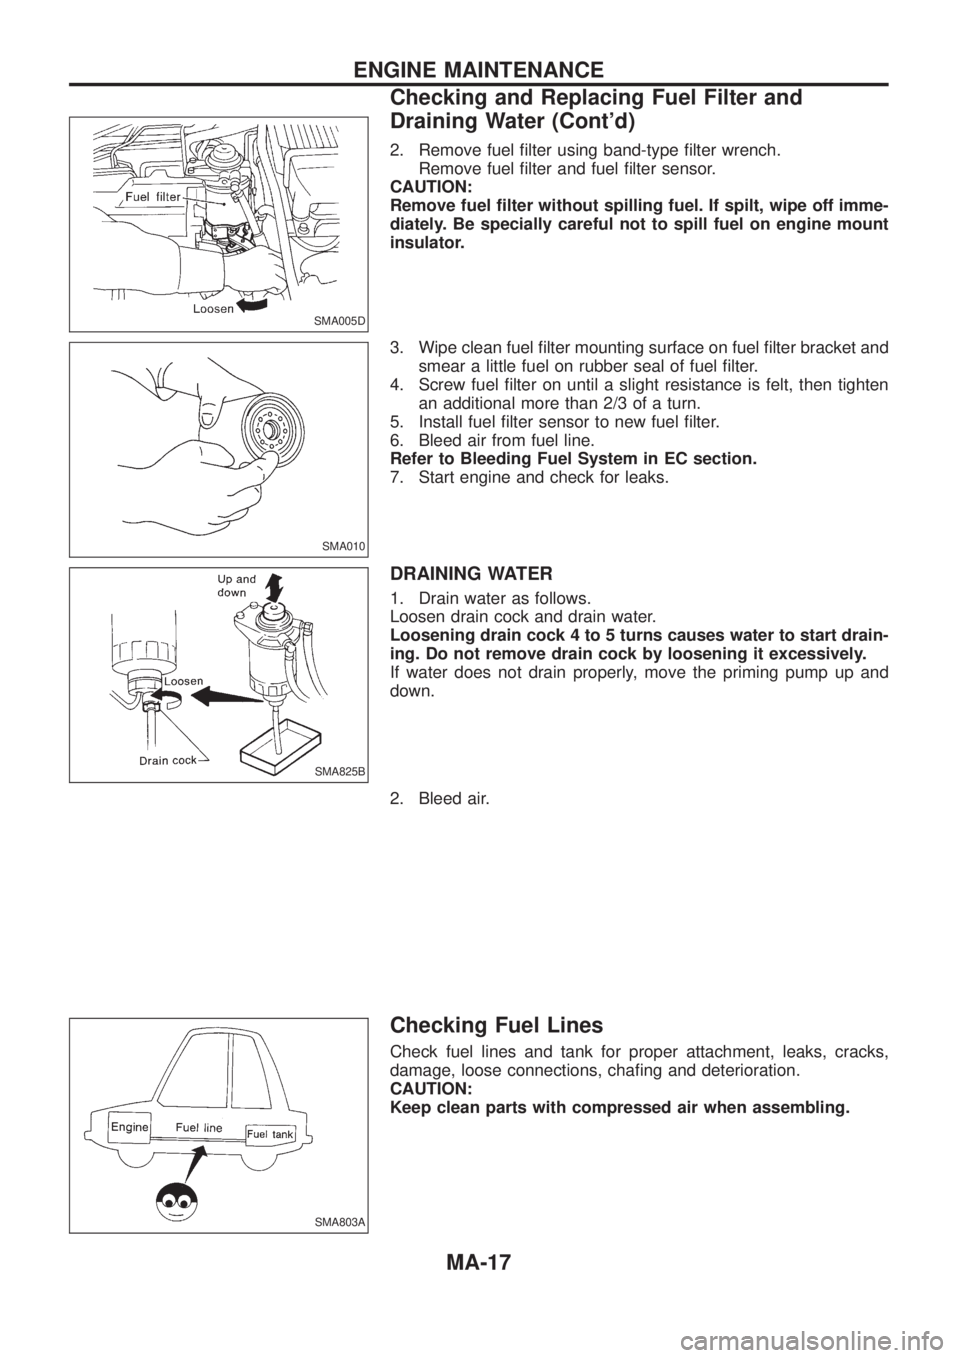 NISSAN PATROL 2006 Workshop Manual 2. Remove fuel ®lter using band-type ®lter wrench.
Remove fuel ®lter and fuel ®lter sensor.
CAUTION:
Remove fuel ®lter without spilling fuel. If spilt, wipe off imme-
diately. Be specially carefu